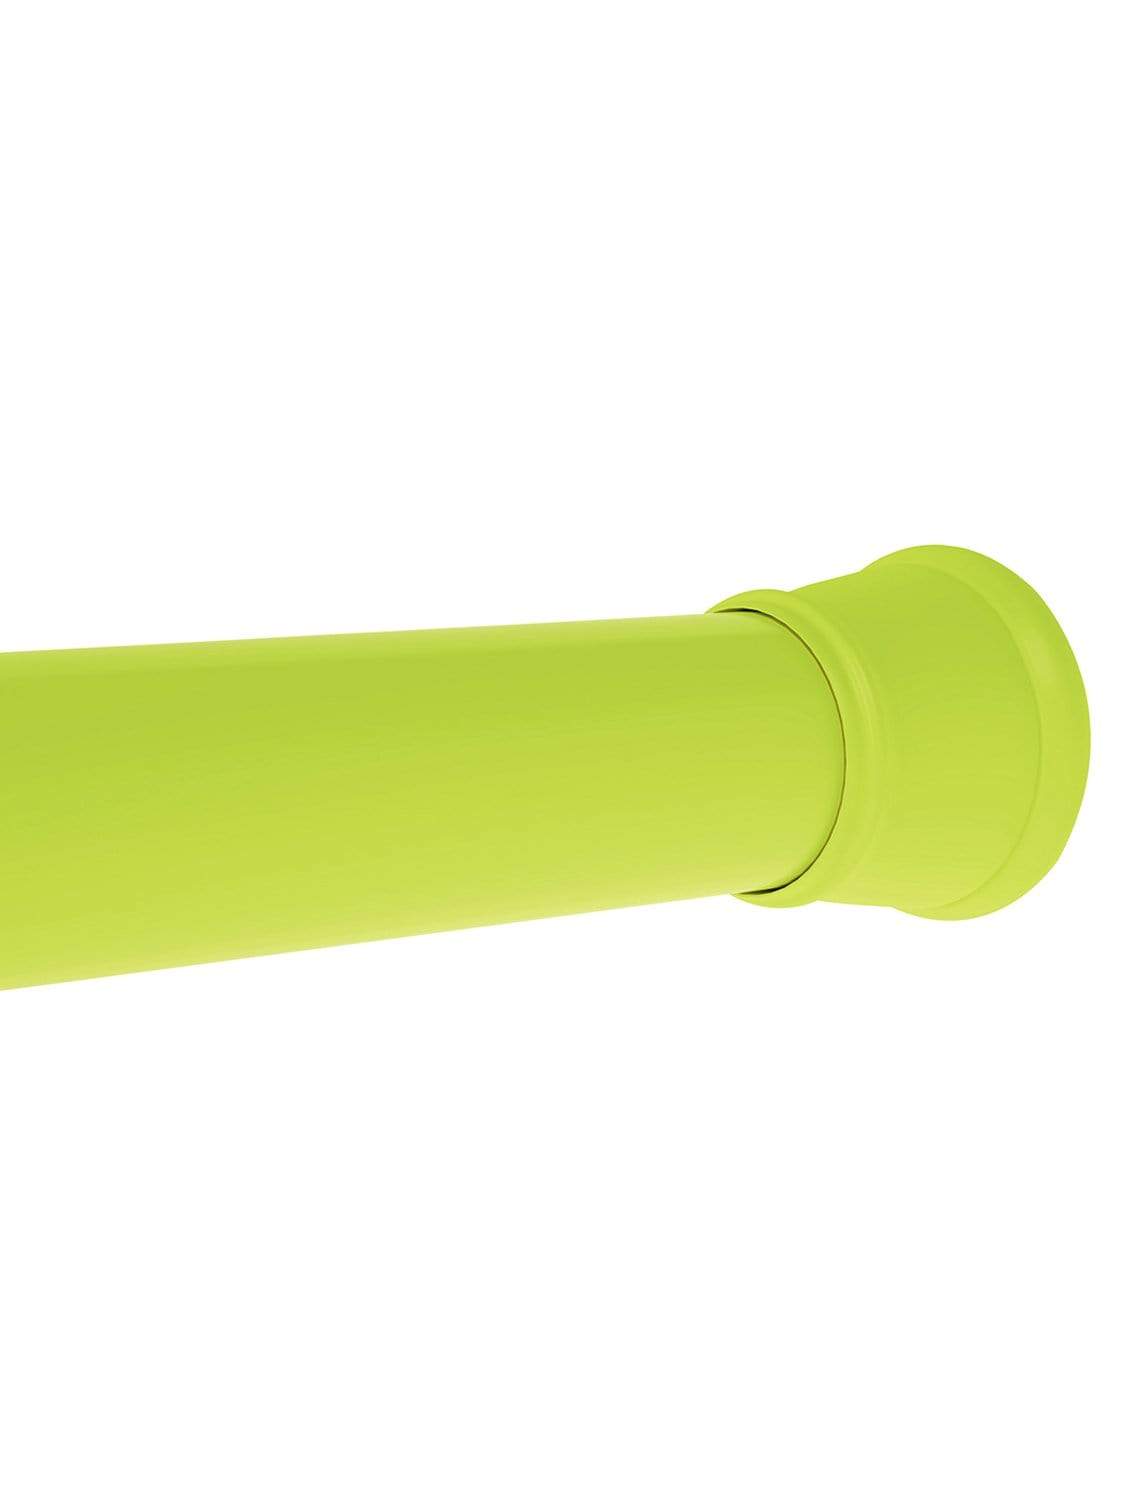 Modern Simple Lightweight Adjustable Extendable Stable Shower rod - Pack of 2 - Neon Green